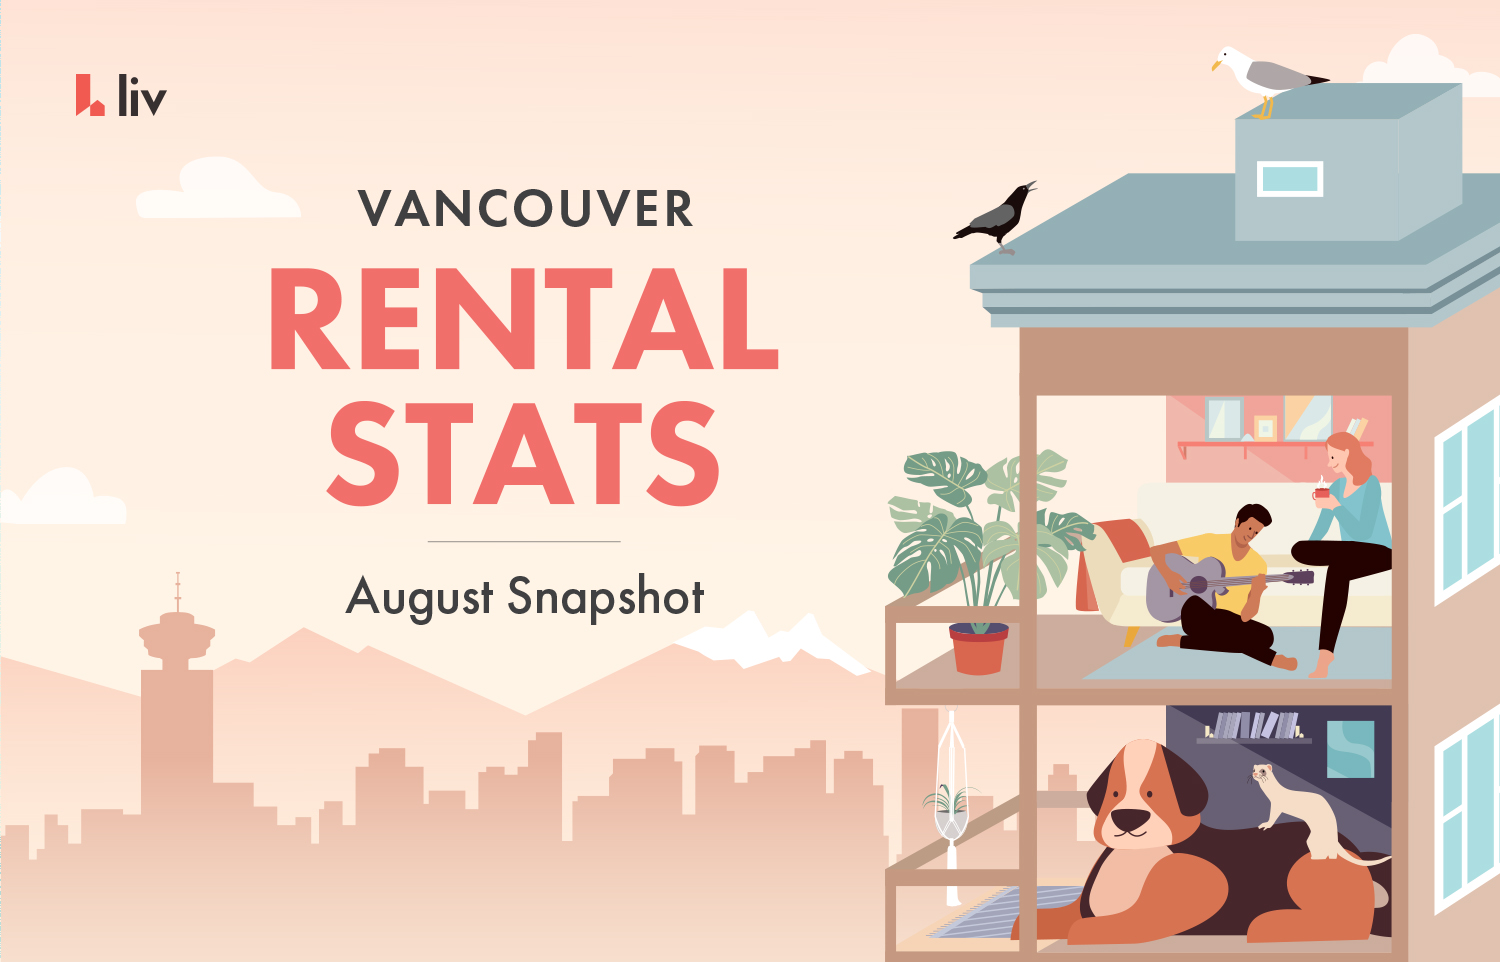 Vancouver Rental Stats – August 2019 Snapshot